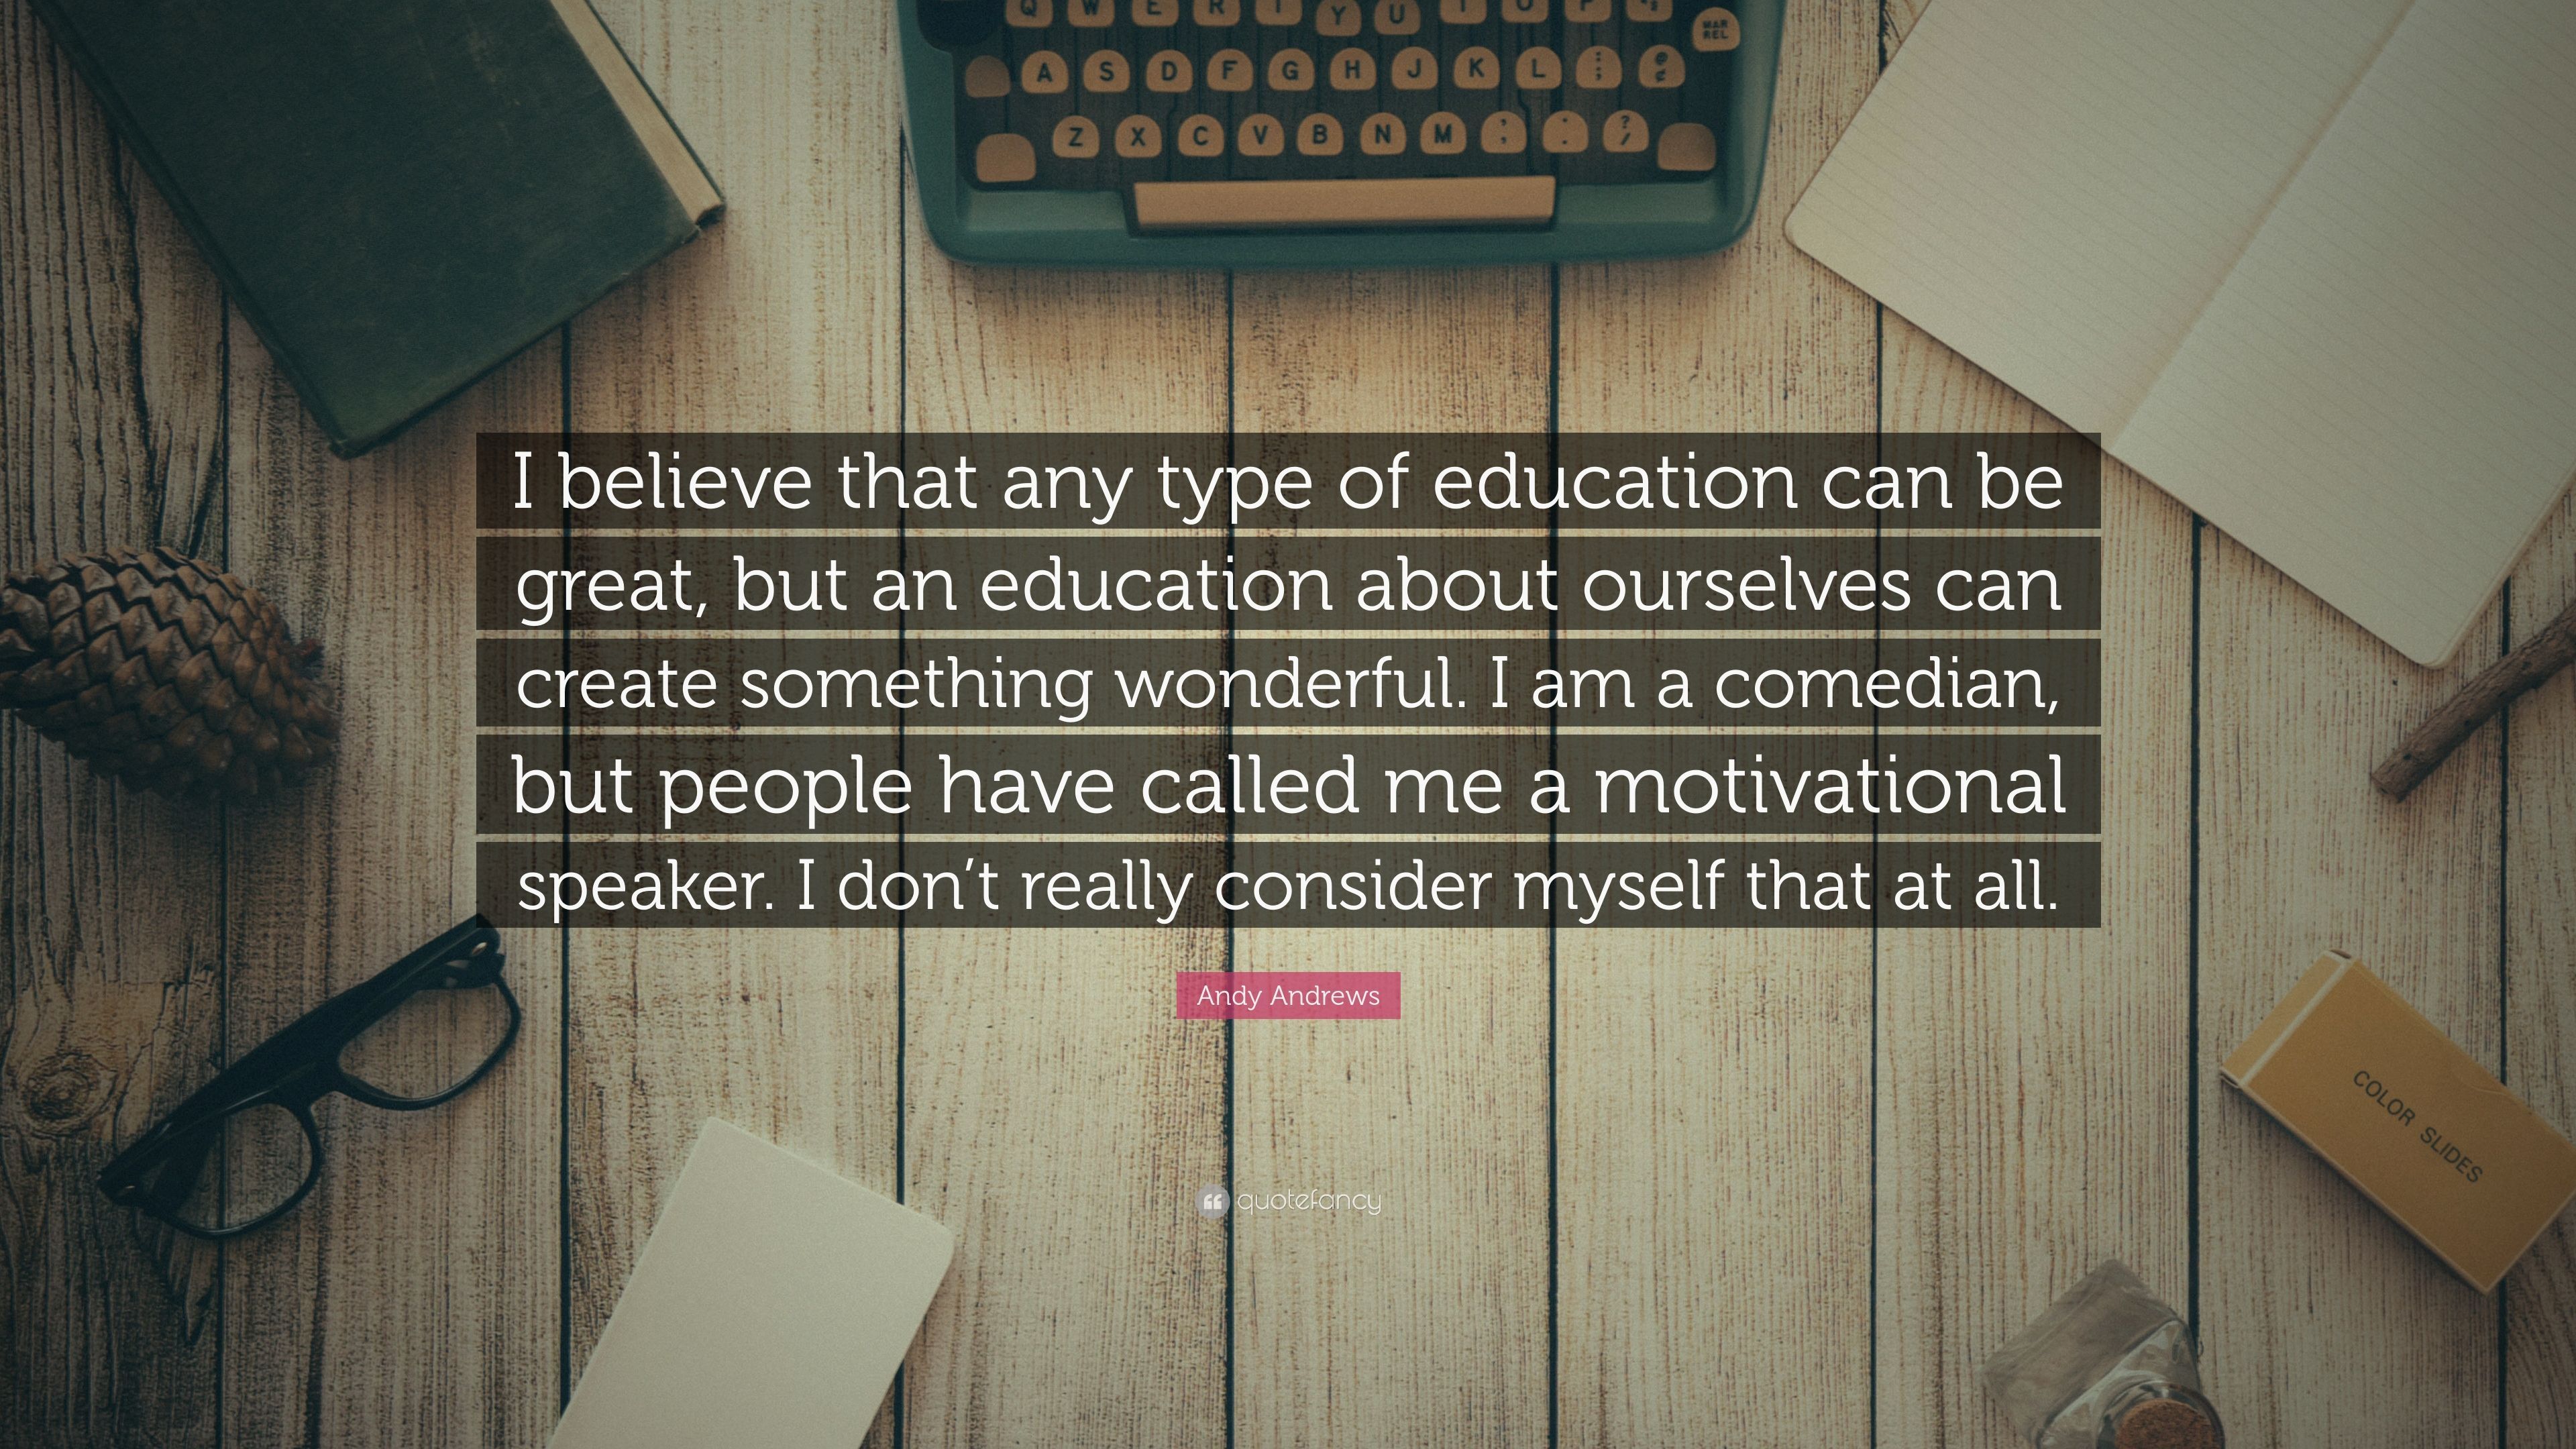 Andy Andrews Quote: "I believe that any type of education can be great...